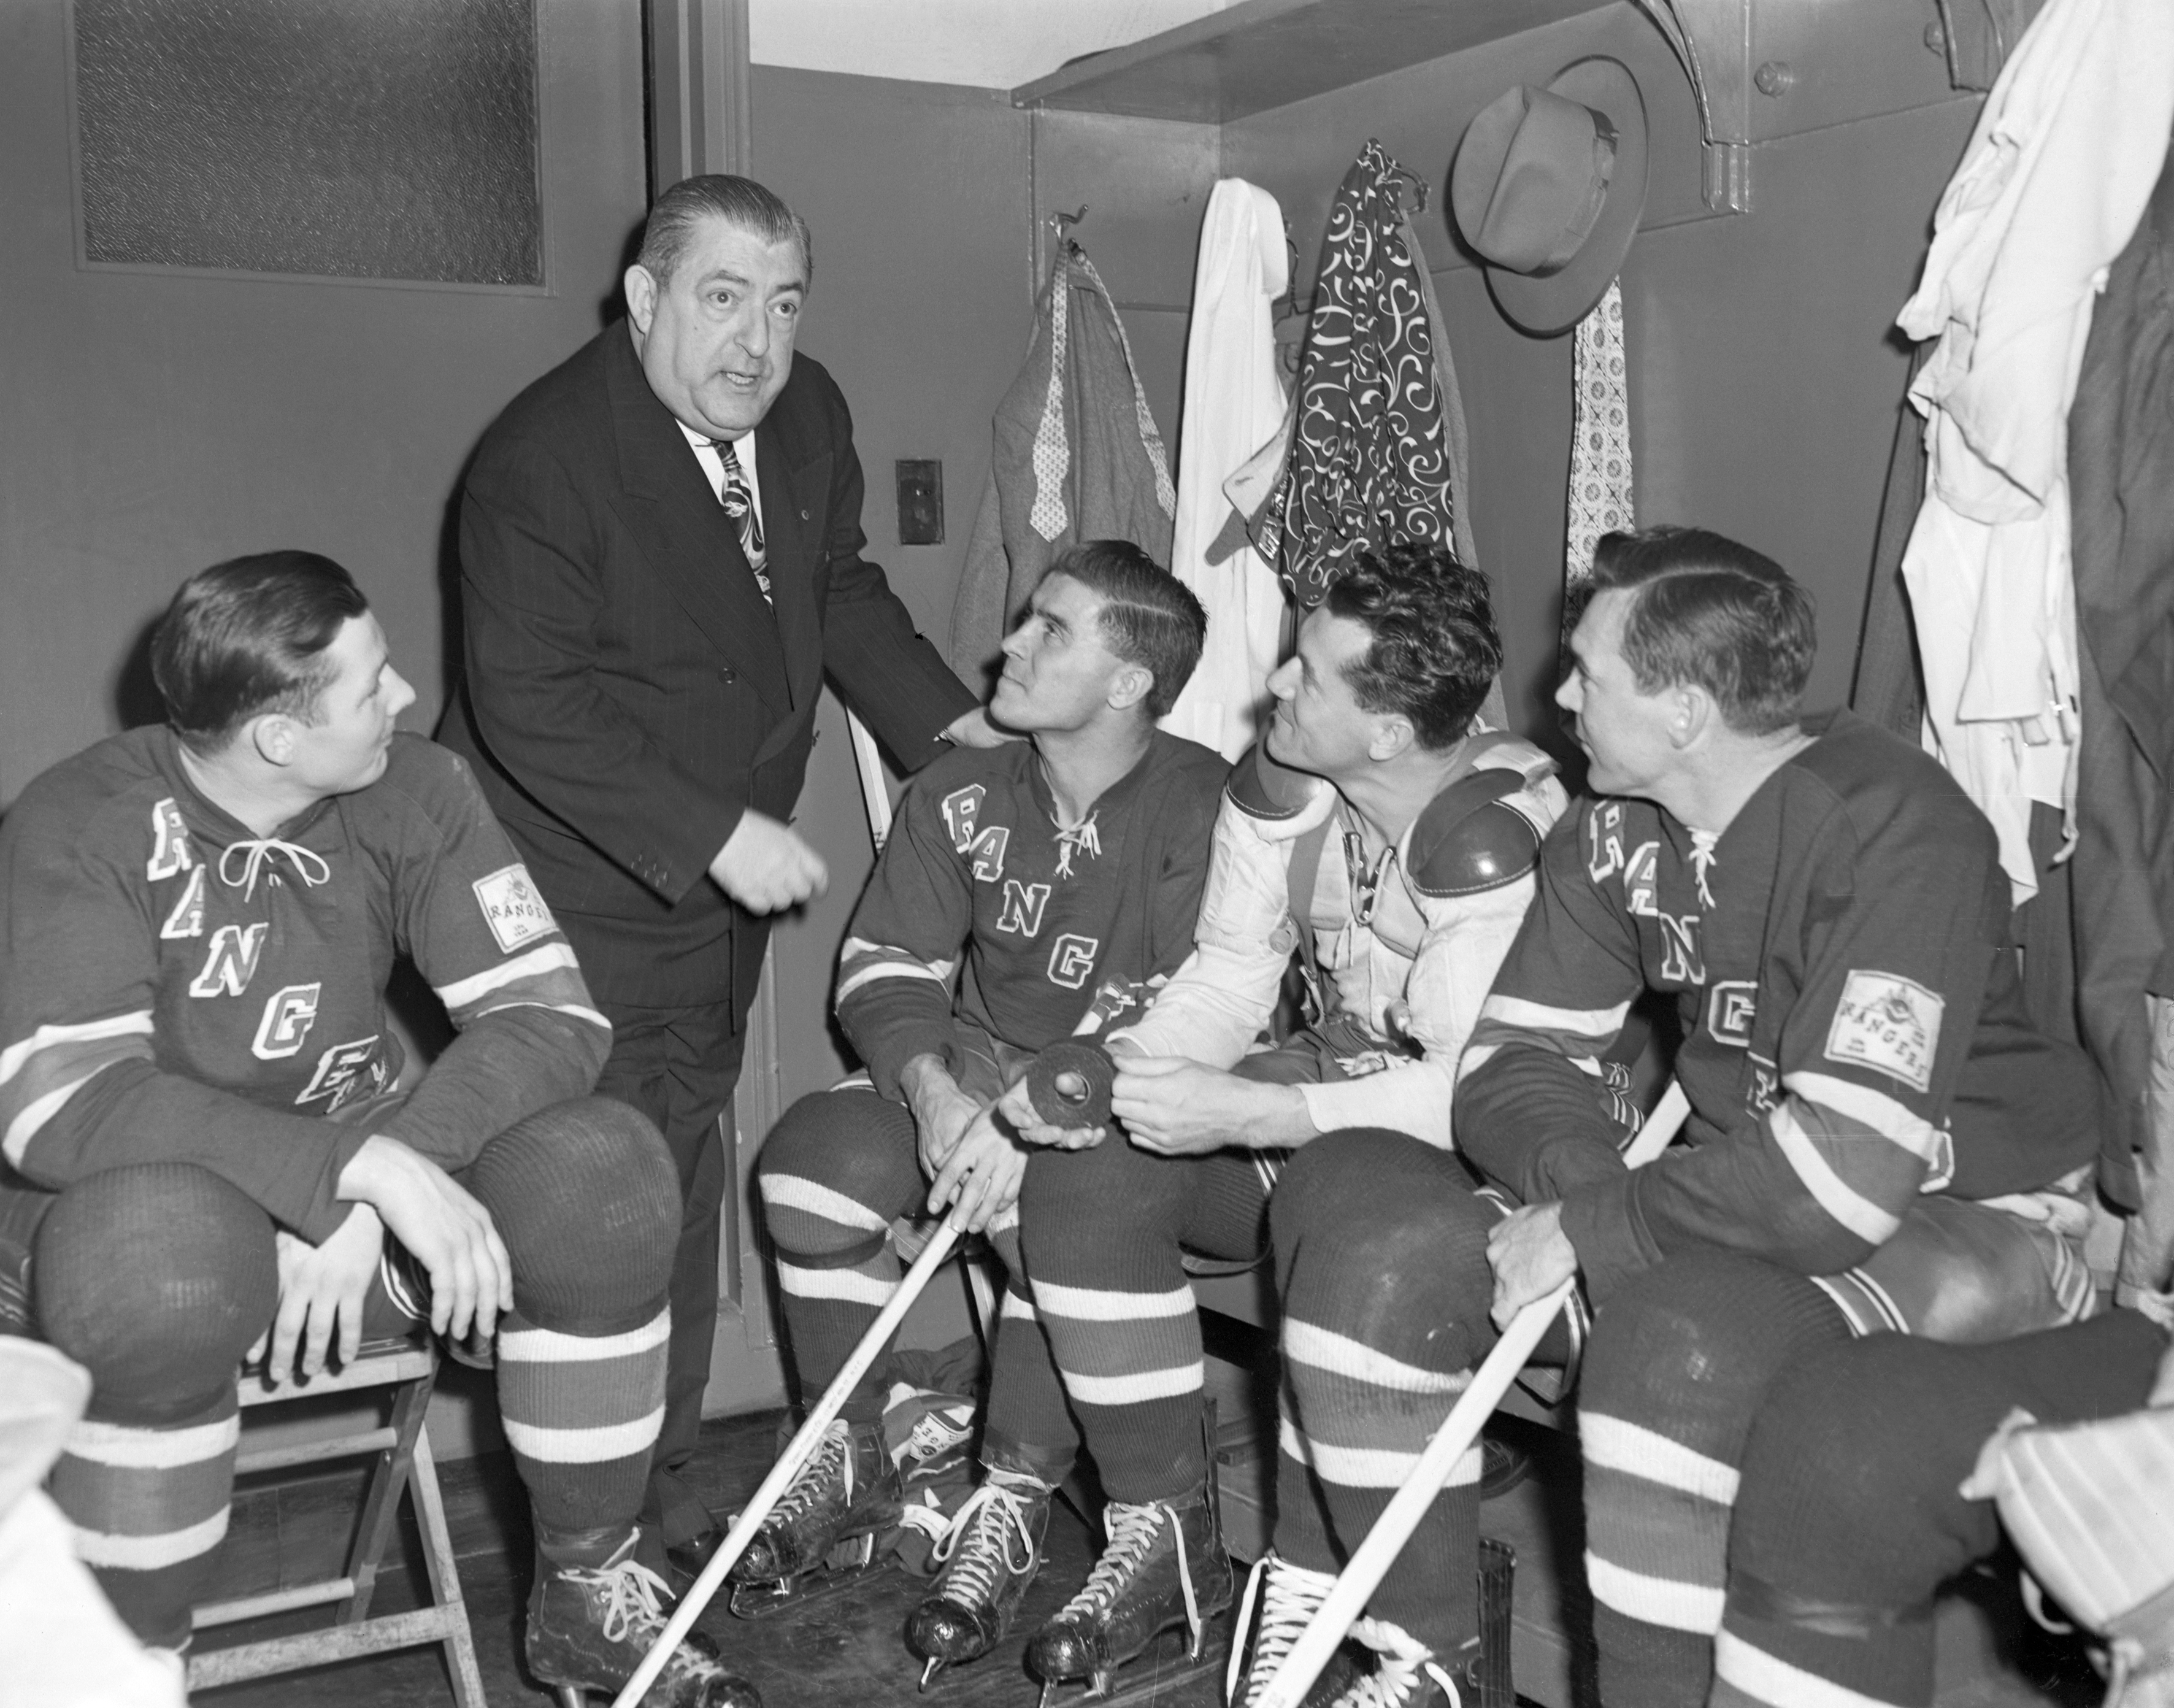 11/15/1950 - New York, NY - Dr. David F. Tracy (second from left) talks to some Rangers before a tilt with Nov. 15th bout. From left to right are Rangers: Pentti Lund; Tony Leswick; Killer Kaleta and Buddy O'Connor (Photo Courtesy of Getty Images).